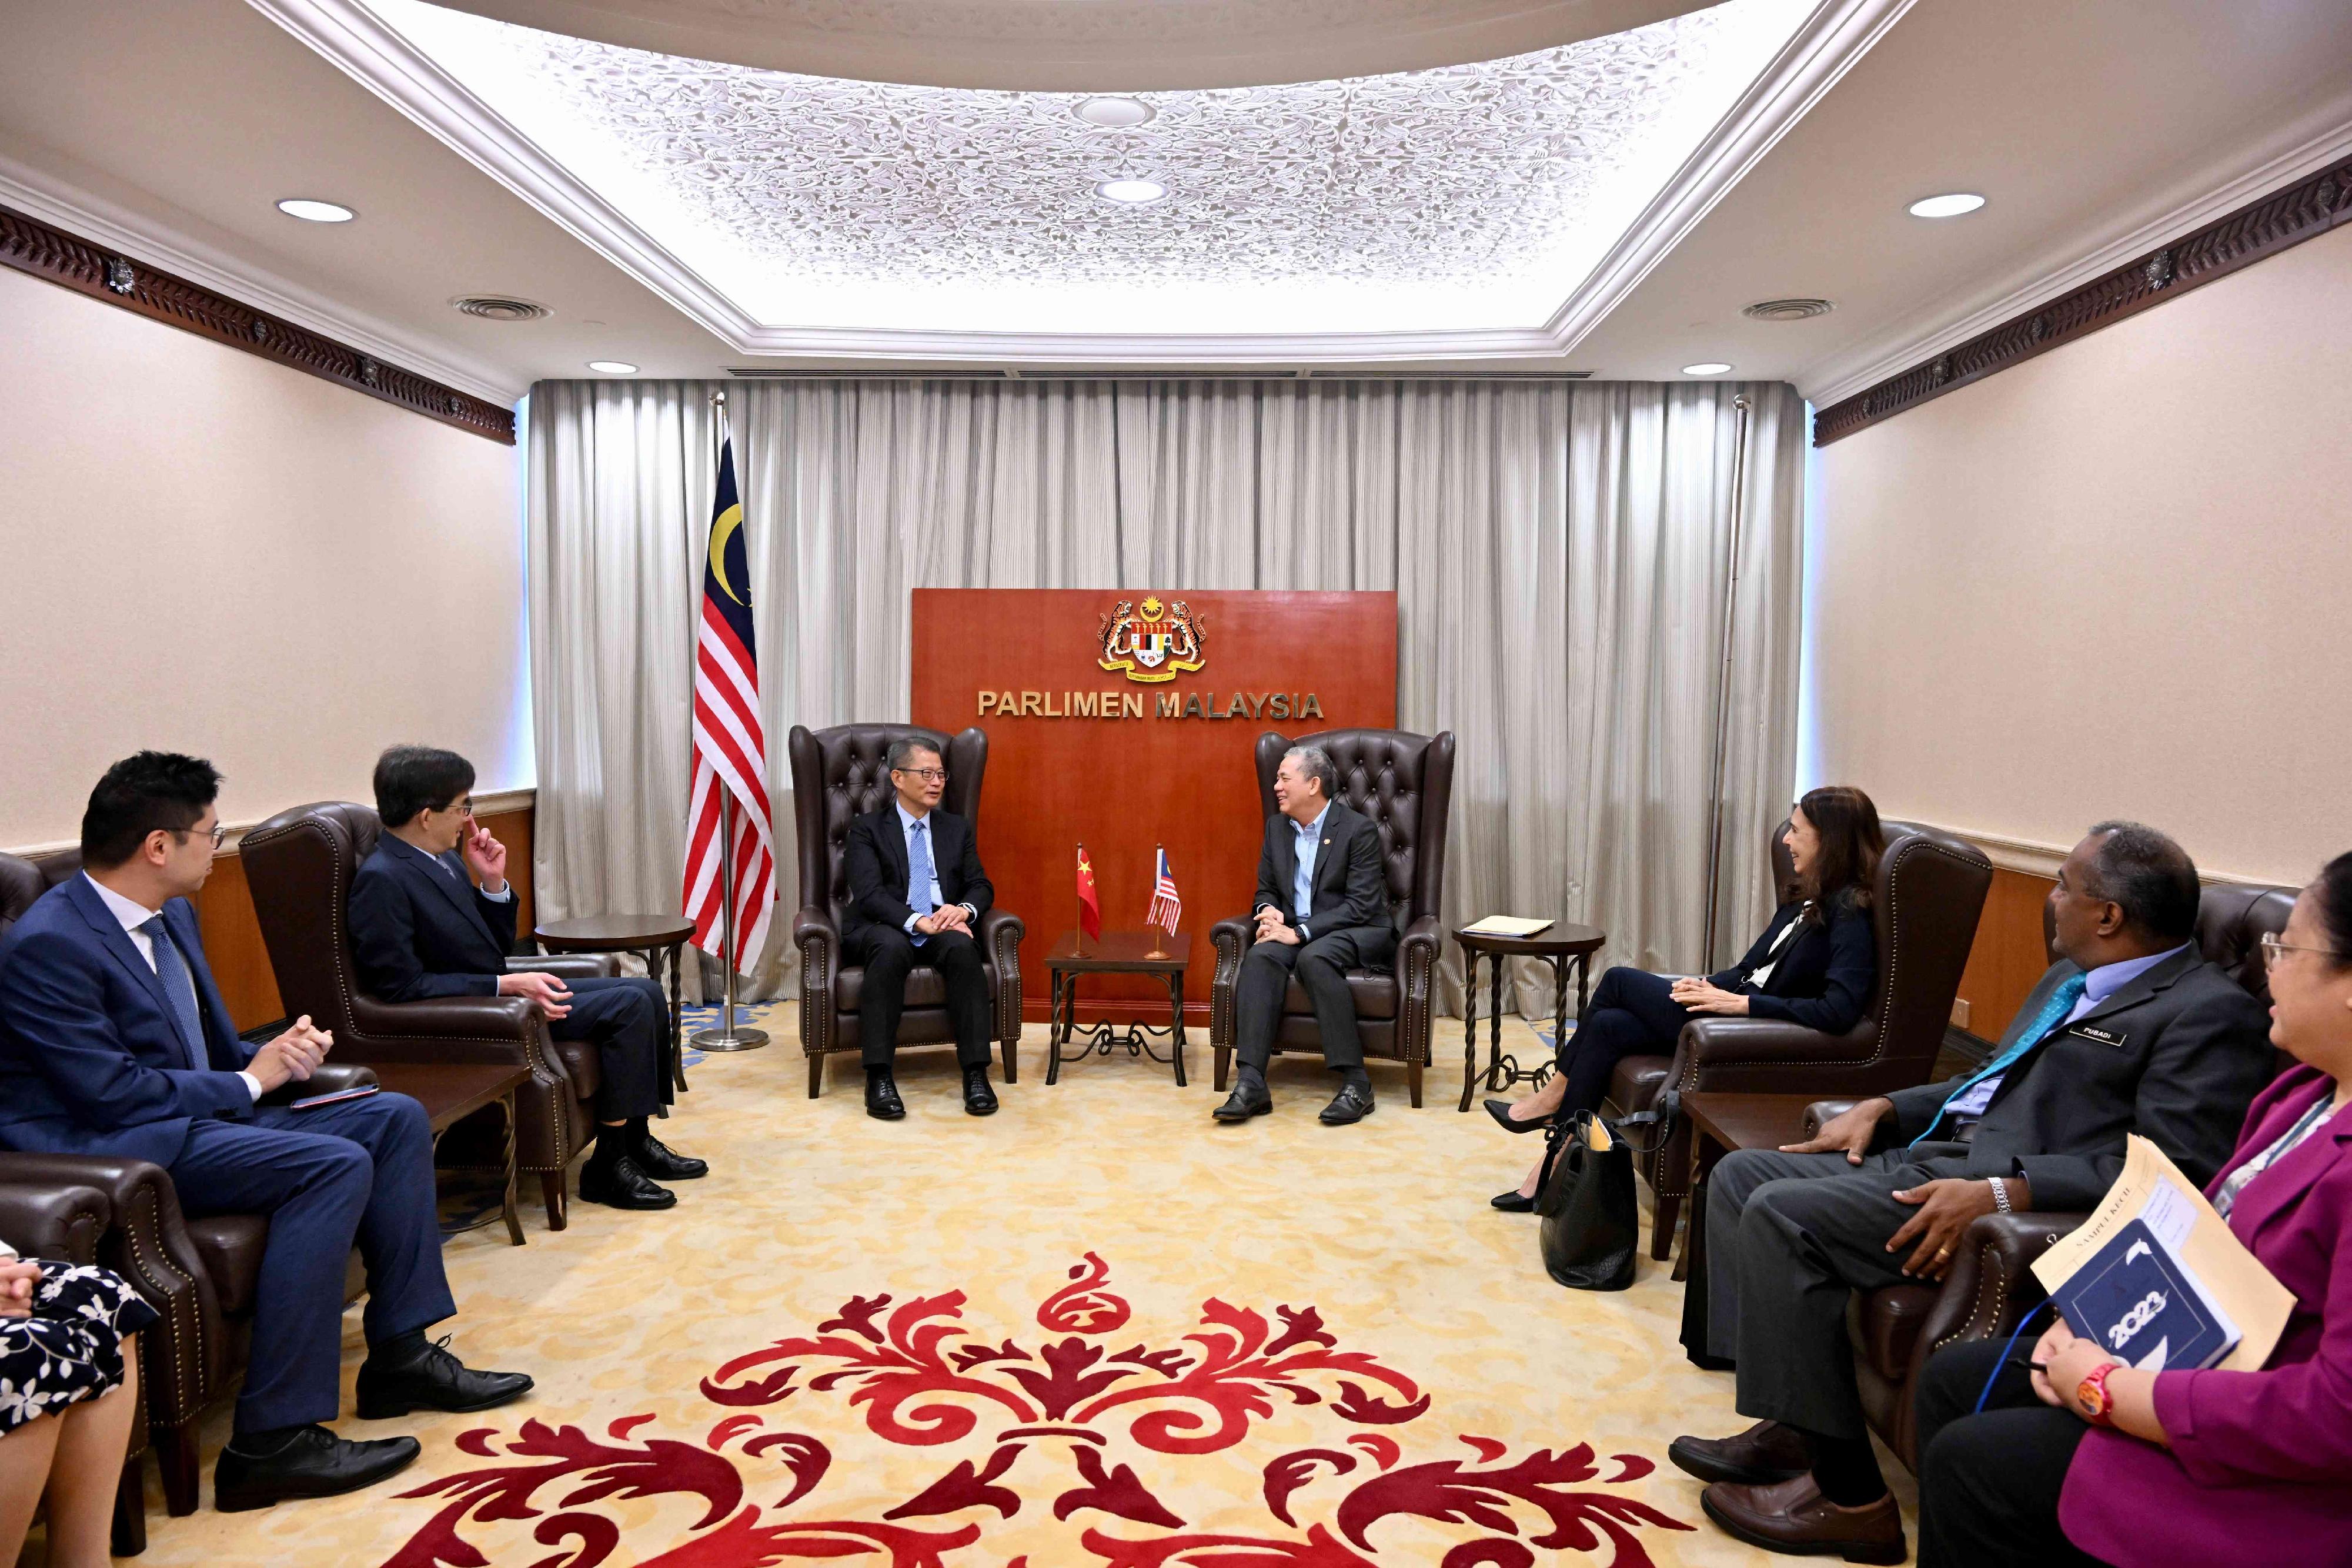 The Financial Secretary, Mr Paul Chan, continues his visit in Malaysia today (March 28). Photo shows Mr Chan (third left) meeting with Deputy Prime Minister and Minister for Plantation and Commodities of Malaysia, Mr Fadillah Yusof (fourth right).